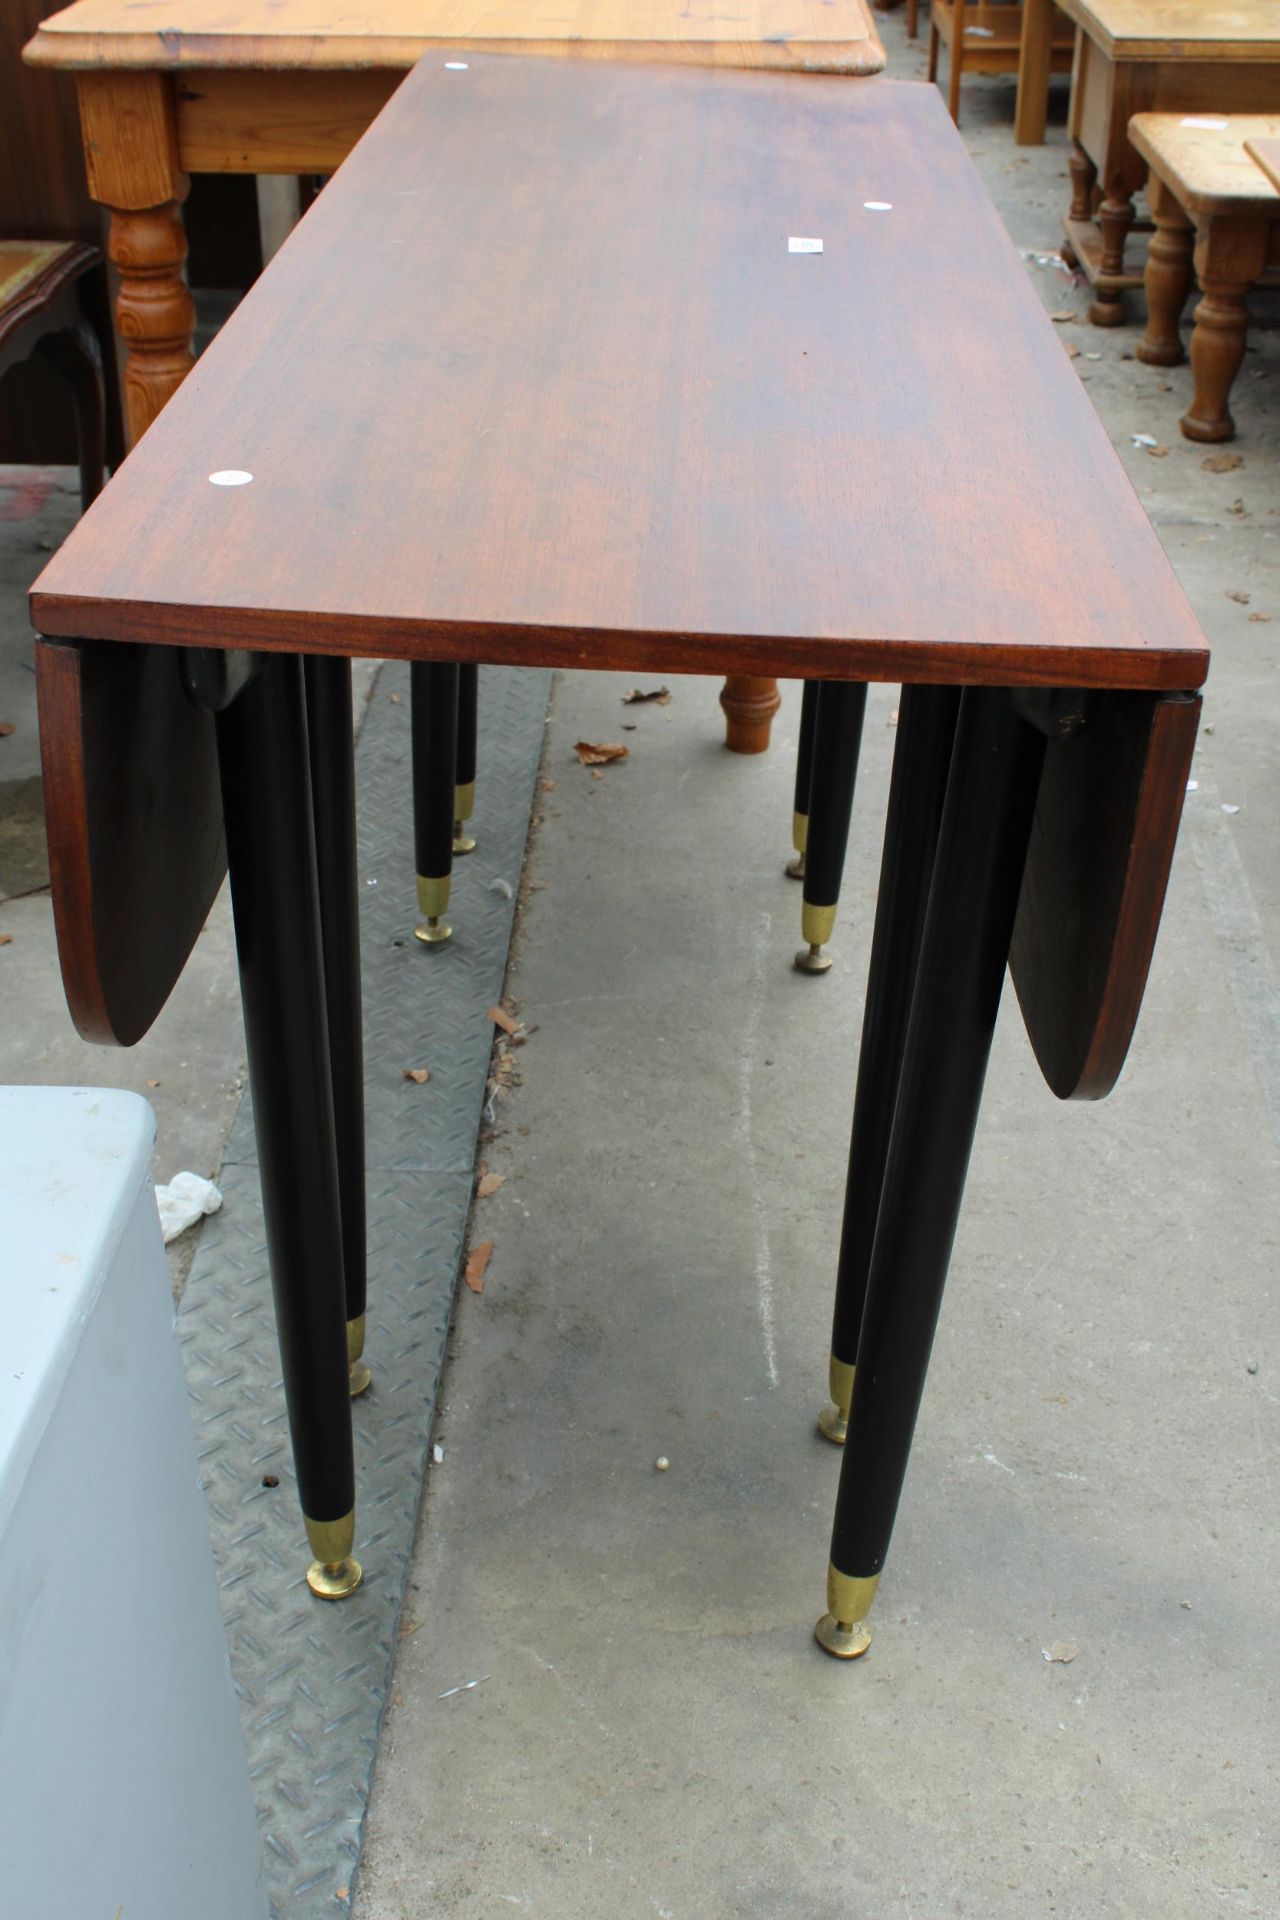 A RETRO TOLA WOOD POSSIBLY G PLAN E GOMME LIBRENZA (NO LABEL) DROP LEAF DINING TABLE ON BLACK - Image 2 of 3